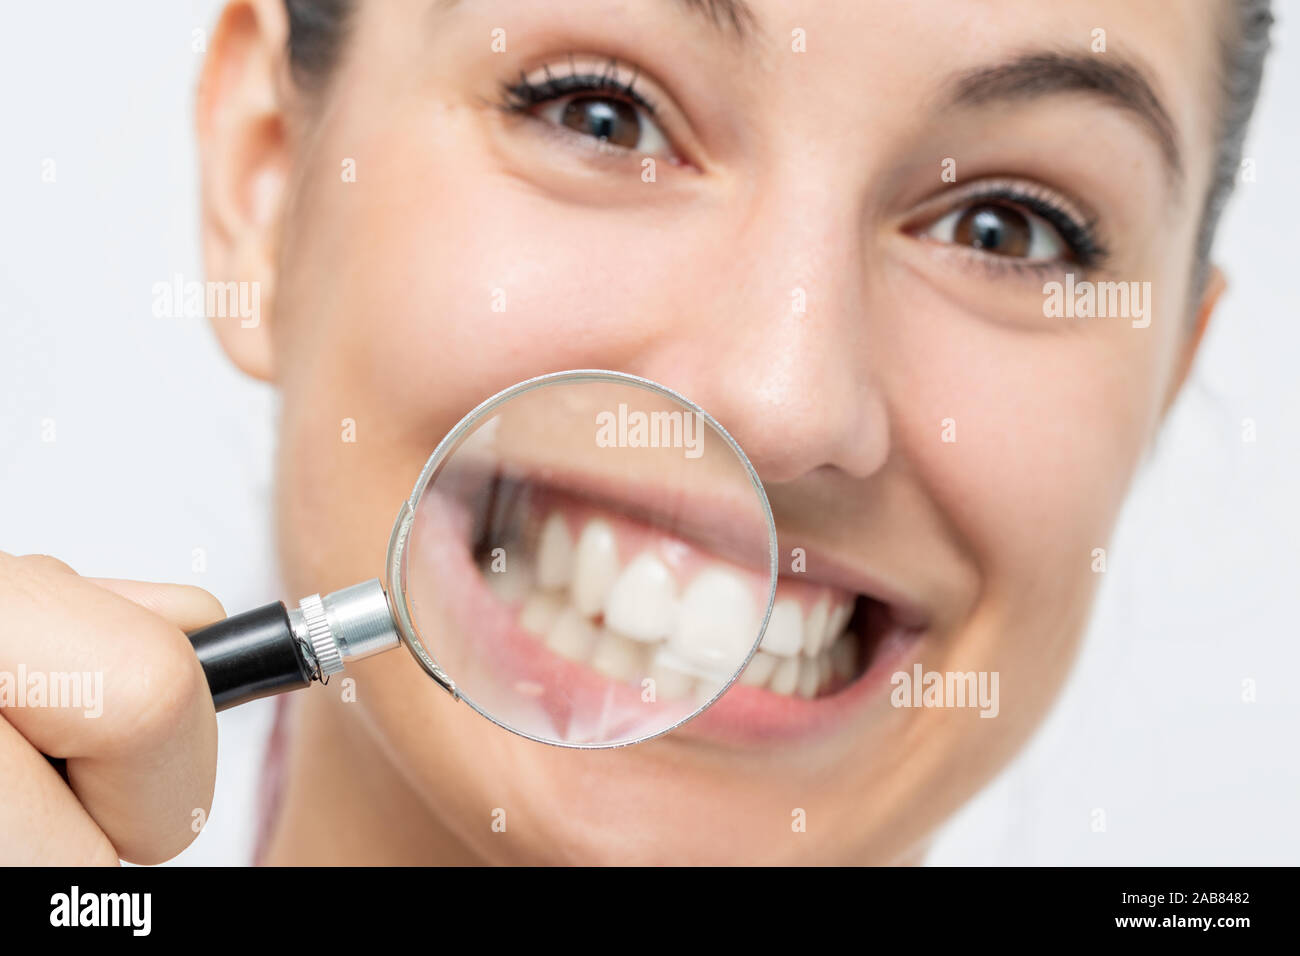 Close up fun portrait of young girl showing teeth with magnifying glass. Isolated on white background. Stock Photo